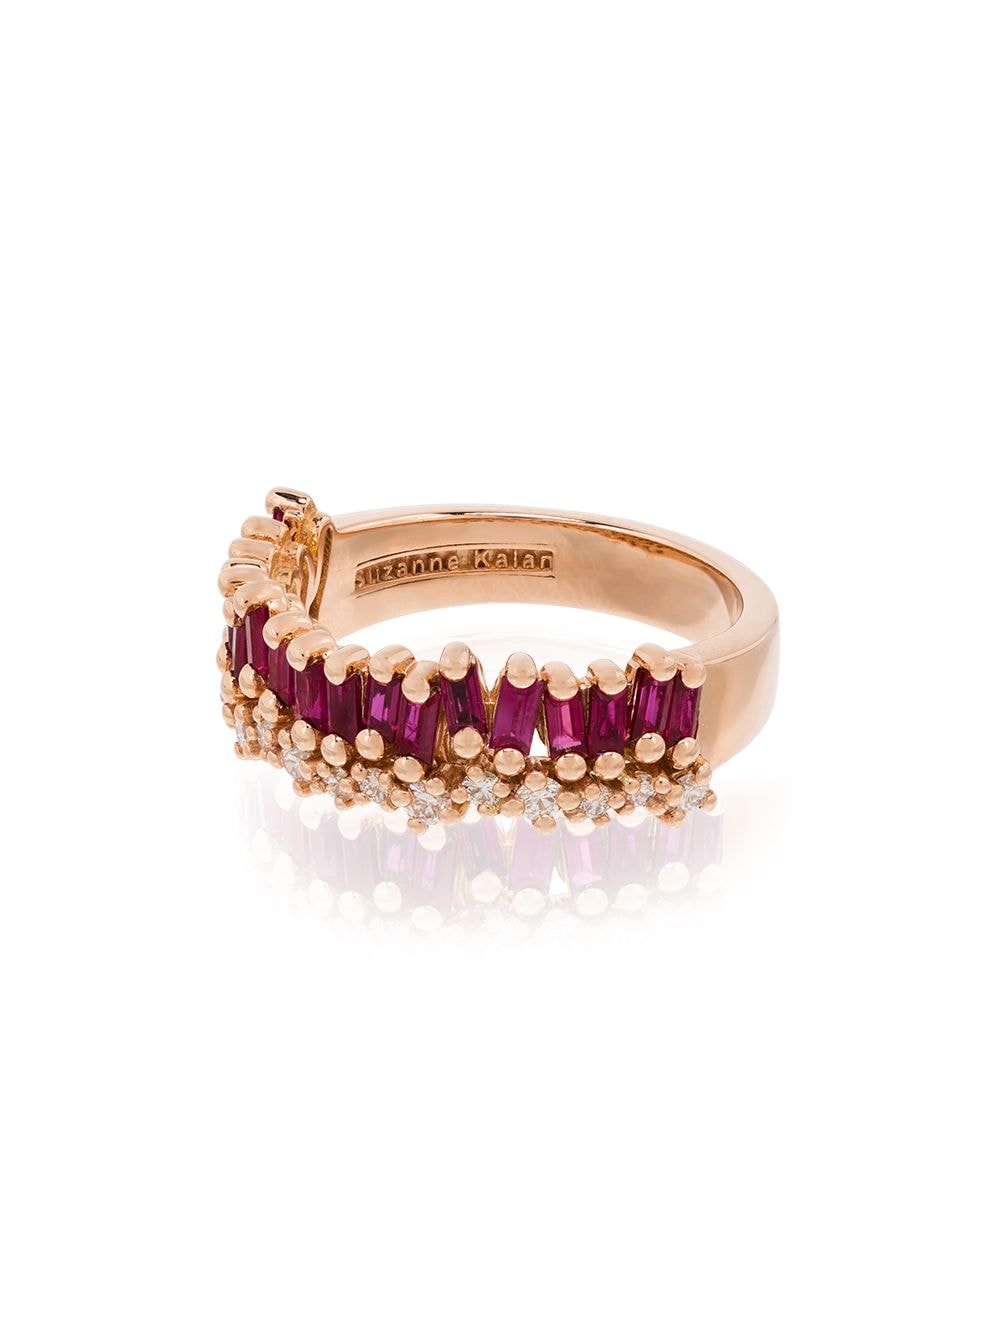 Suzanne Kalan 18kt Rose Gold Ruby And Diamond Baguette Ring - Farfetch